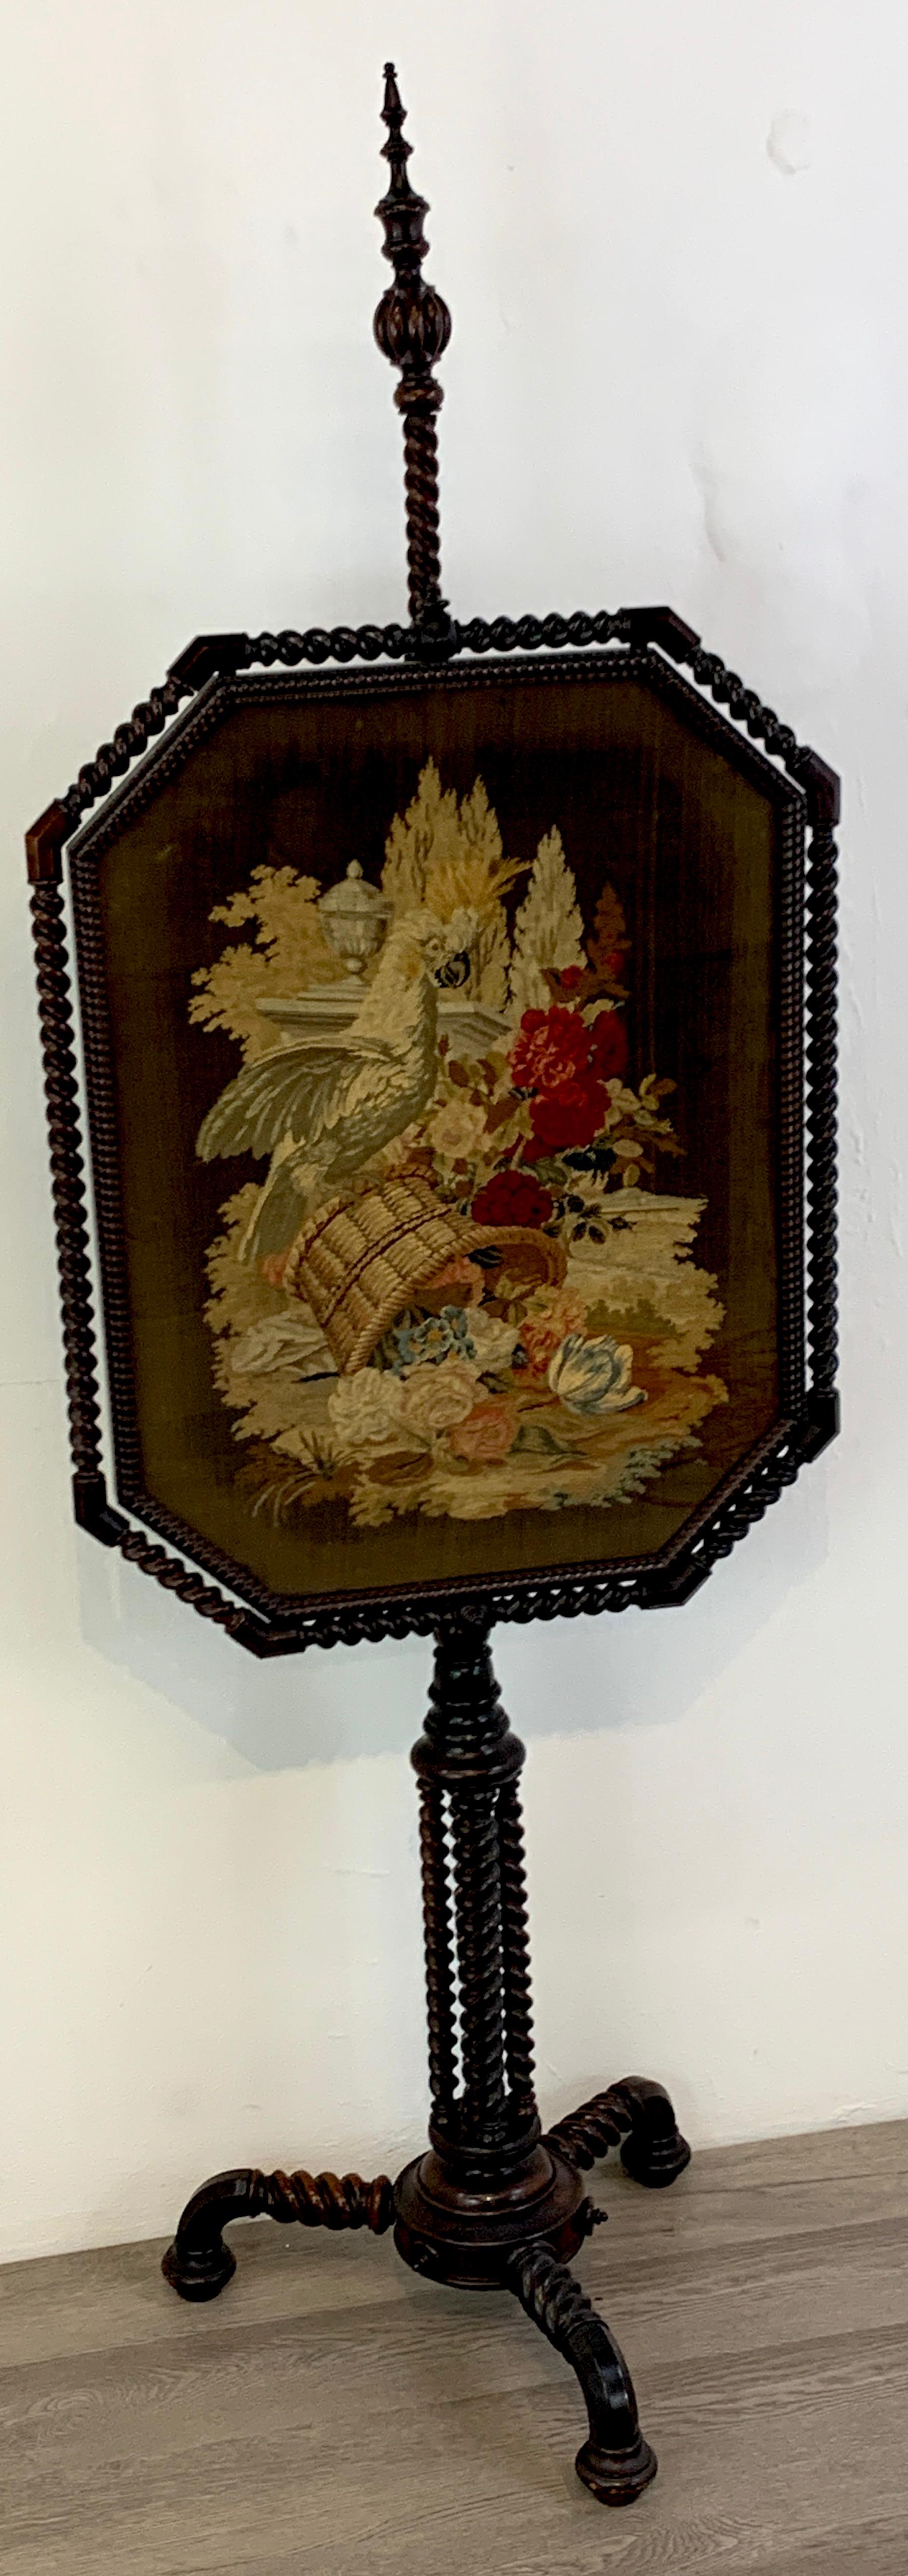 Exquisite 19th century rosewood & needlepoint cockatoo in landscape firescreen, with a nod to Gothic design, this intricately detailed screen is a rare find. With removable carved spiral finial, the moveable framed 30 H x 24